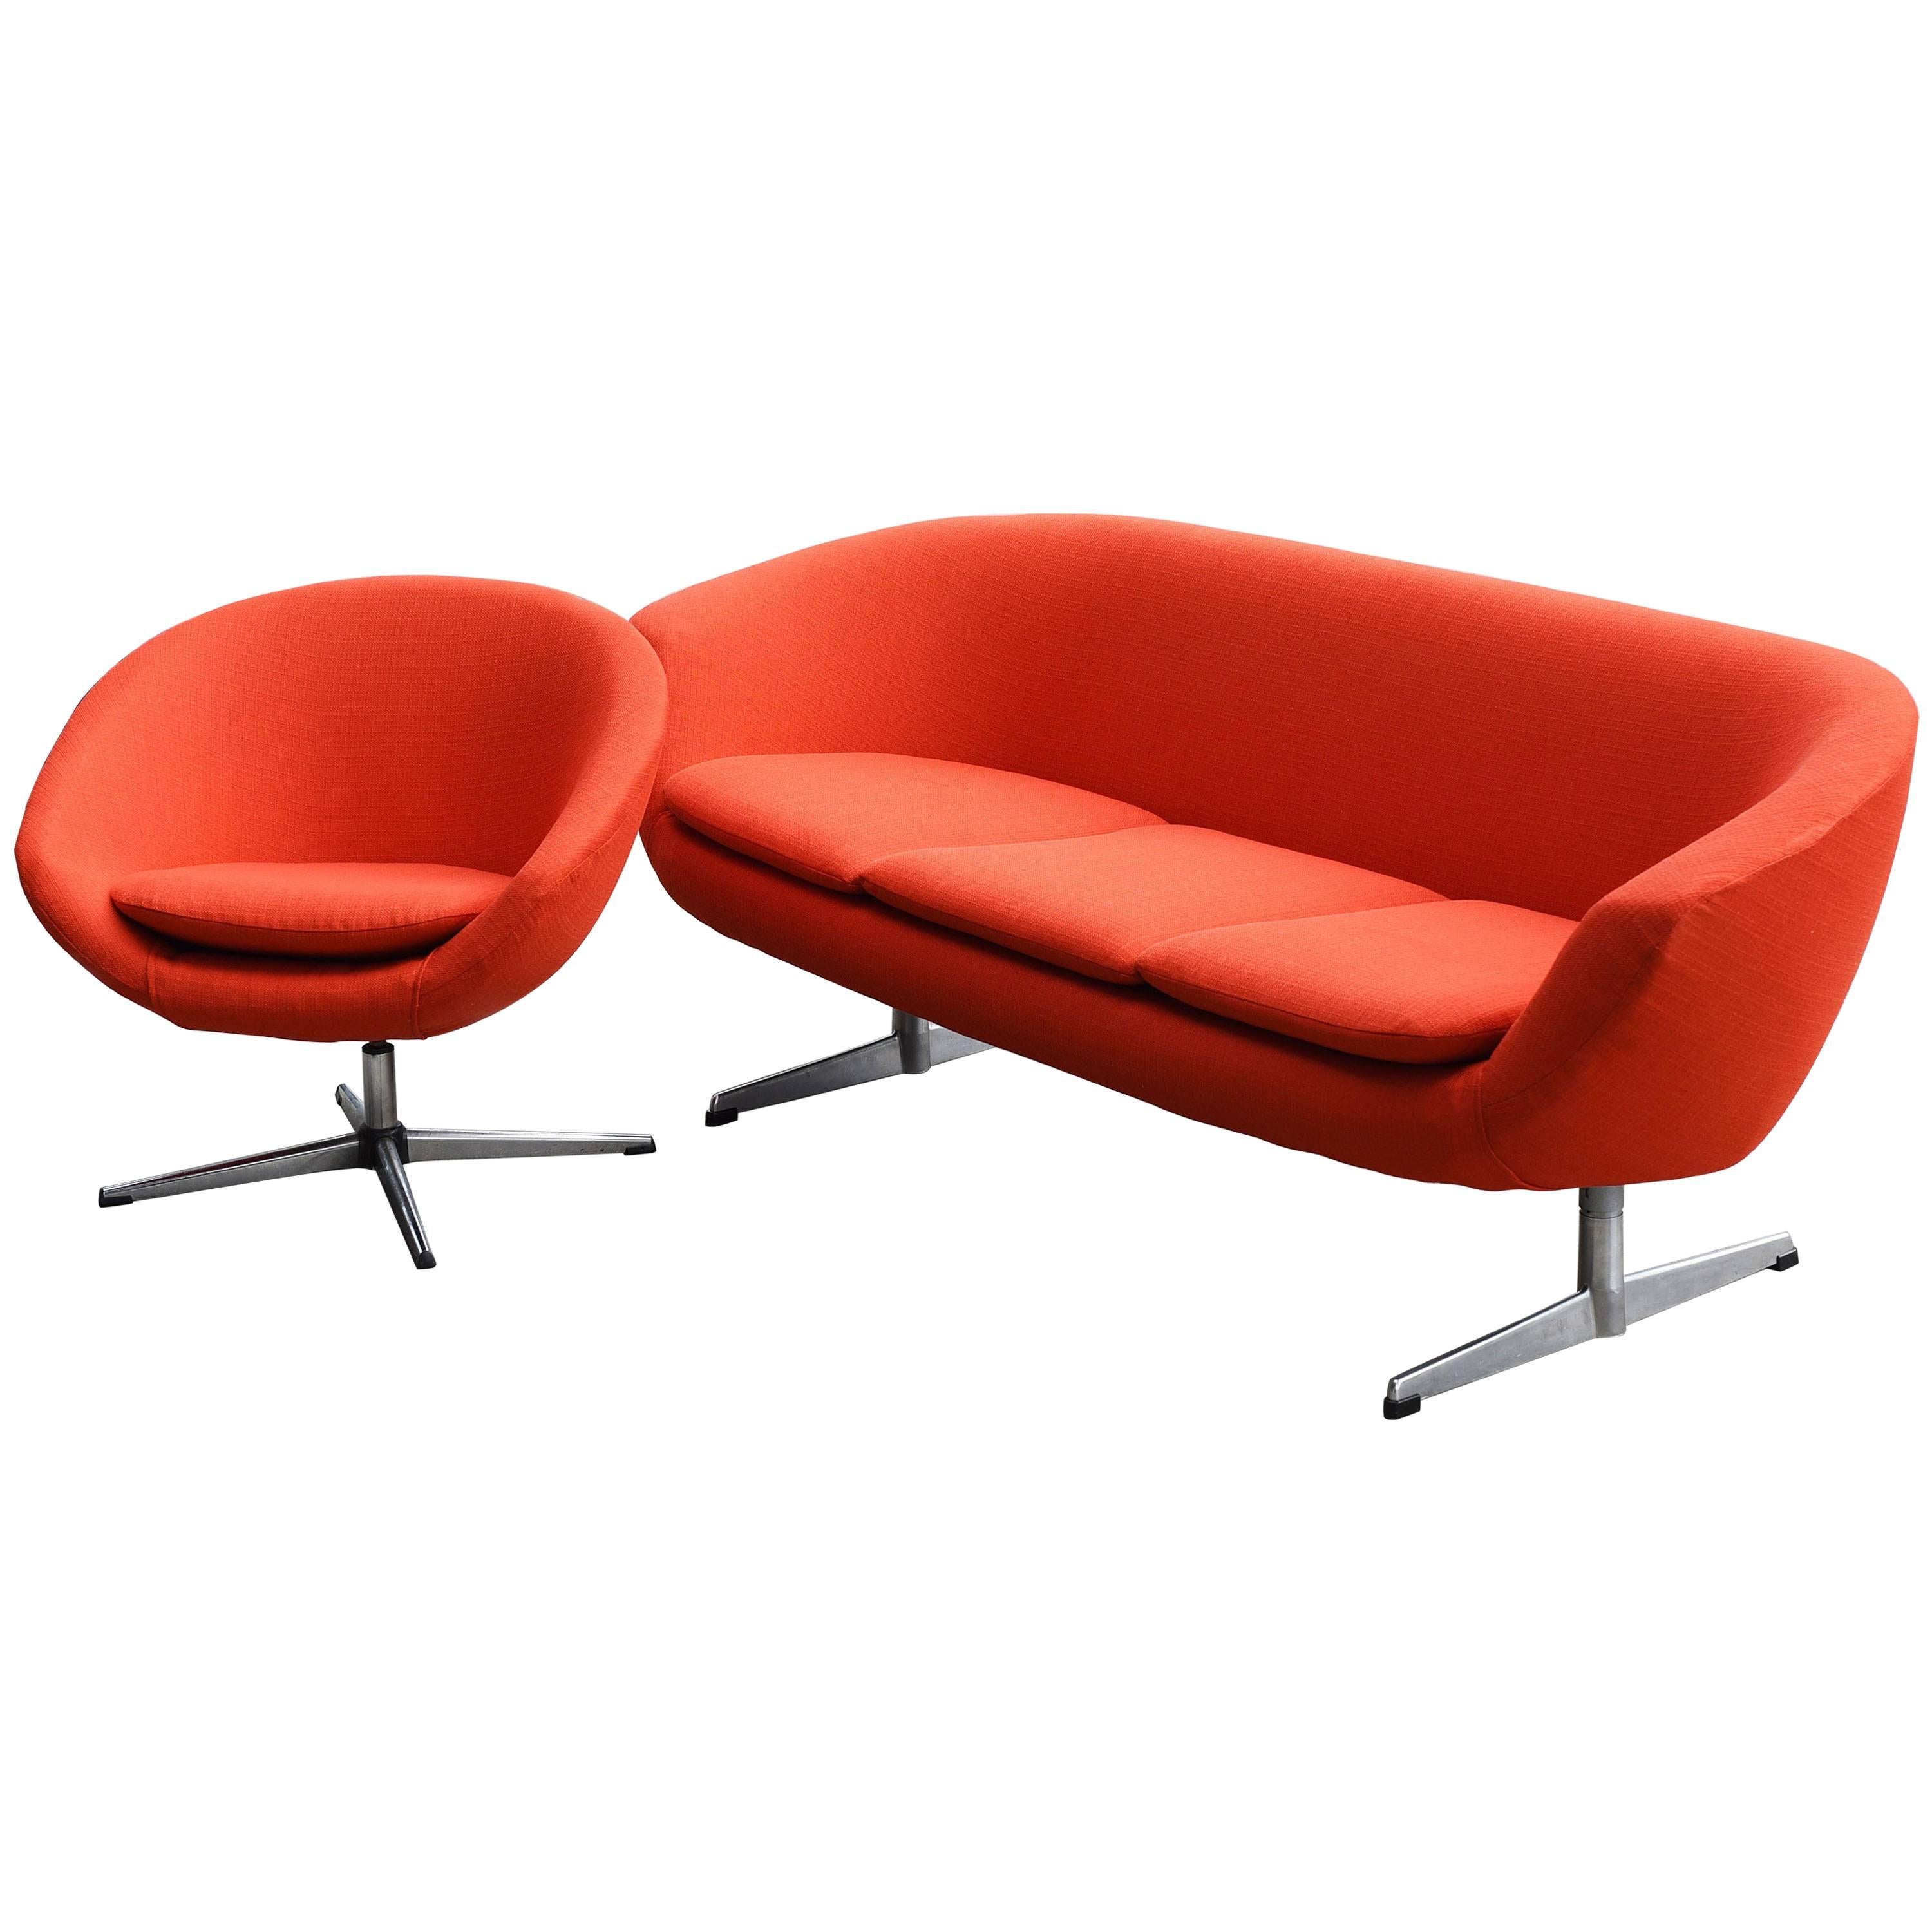 Overman Three-Seat Sofa and Easy Chair